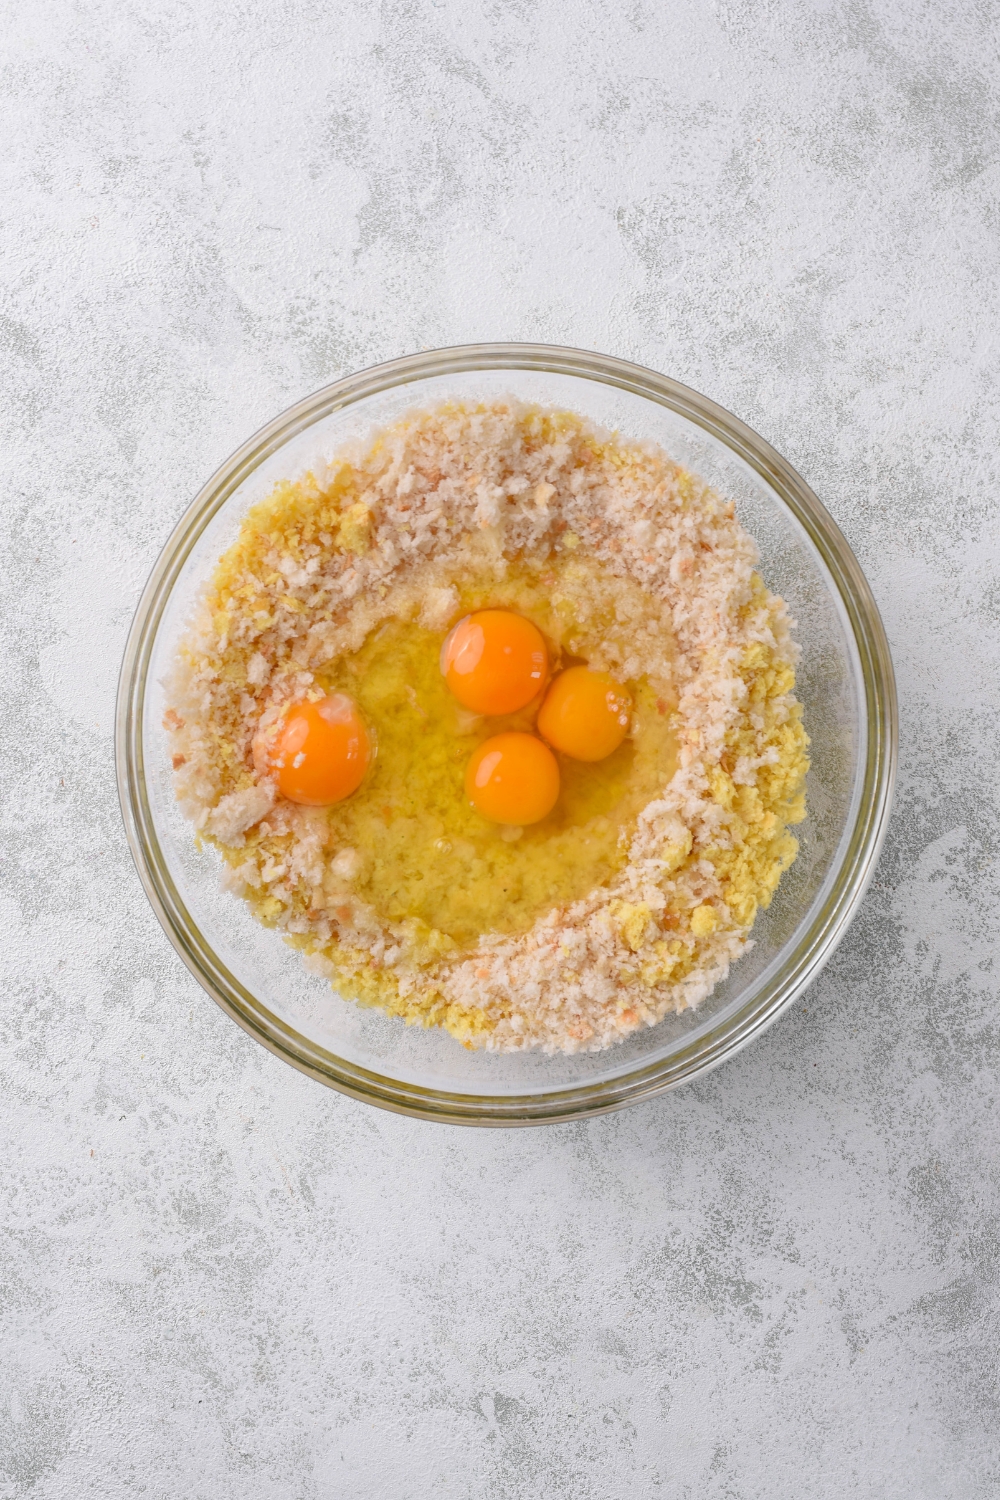 A clear bowl filled with cornbread crumbles, bread crumbs, and four whole eggs.